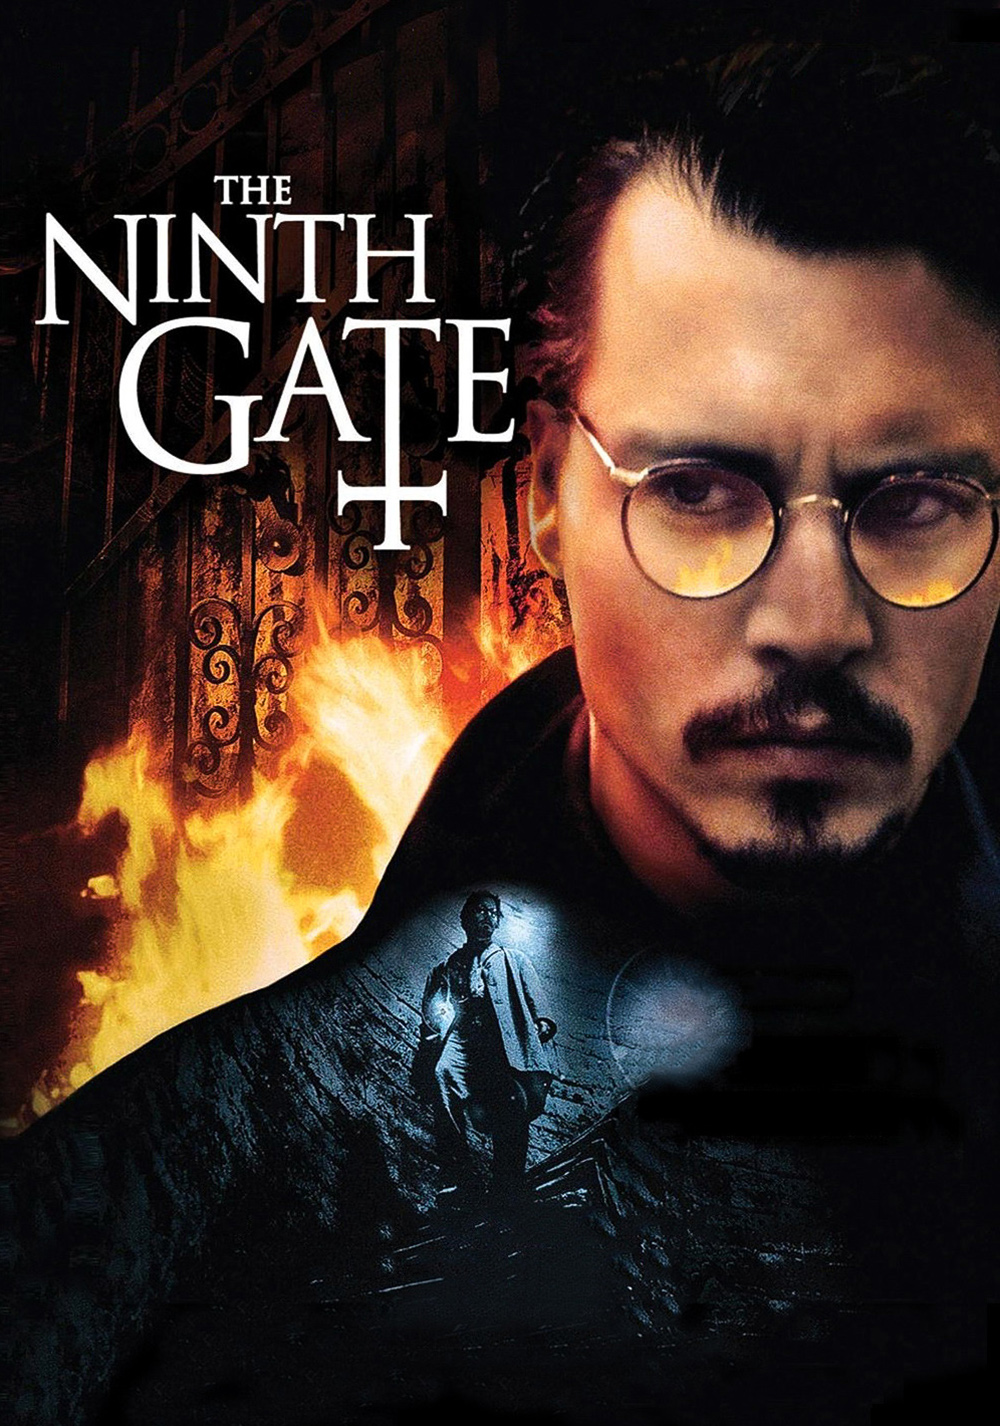 The Ninth Gate Images. 